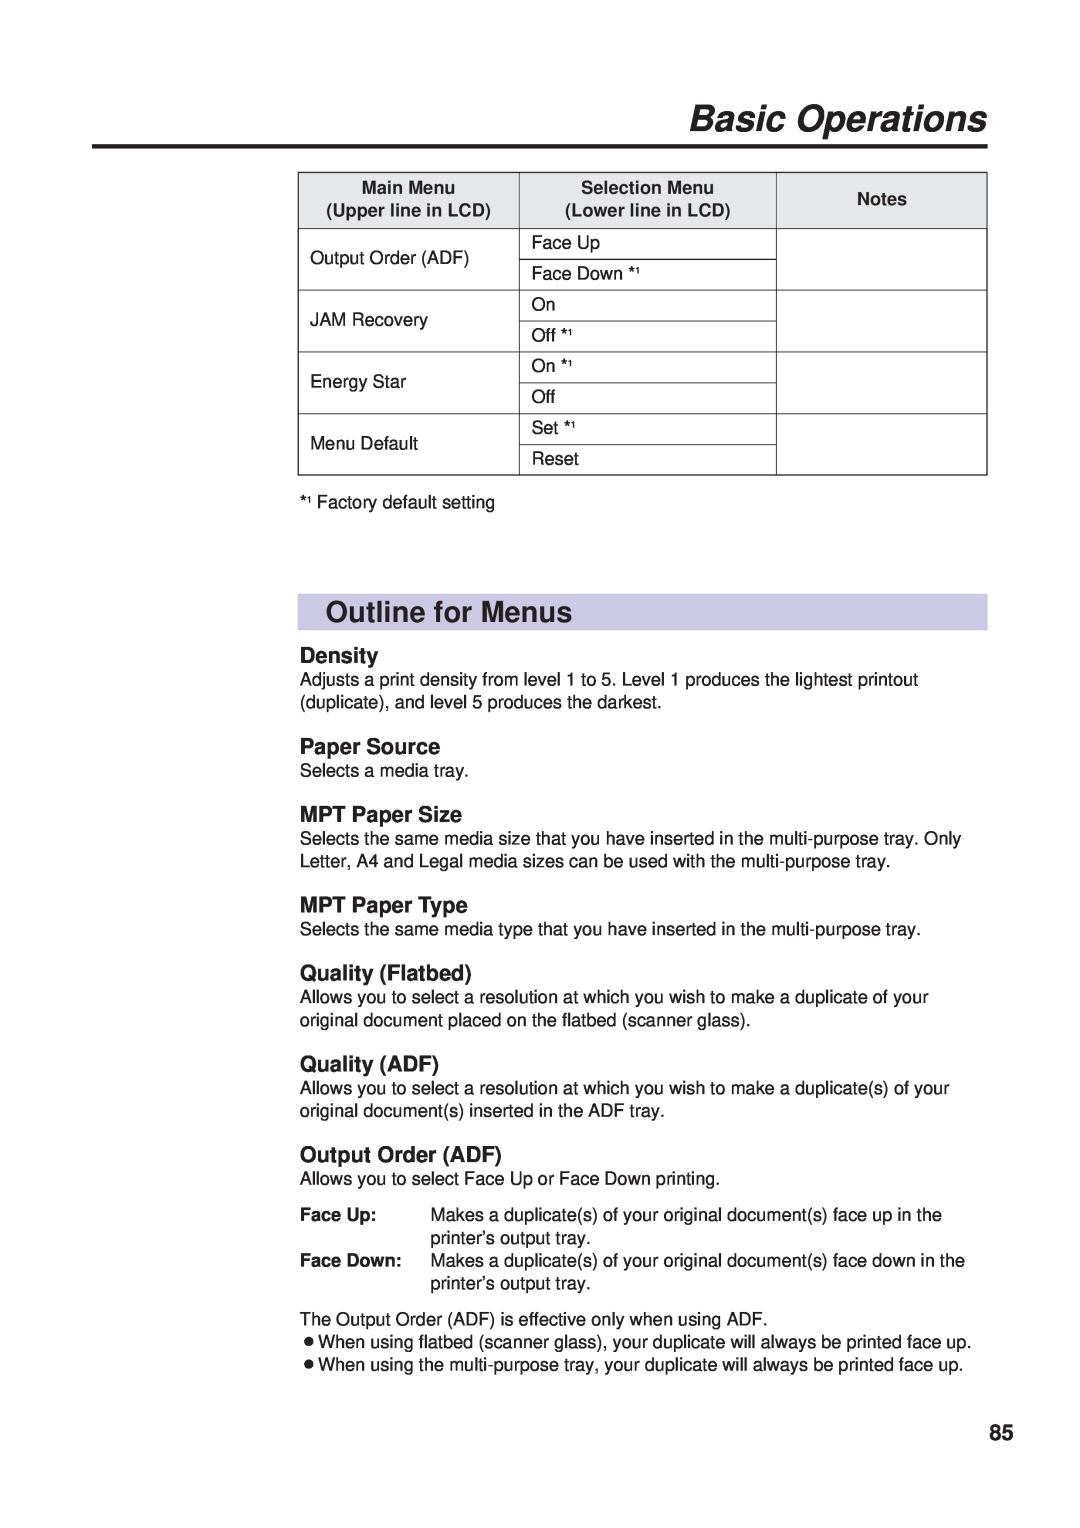 Panasonic KX-PS8000 Outline for Menus, Density, Paper Source, MPT Paper Size, MPT Paper Type, Quality Flatbed, Quality ADF 